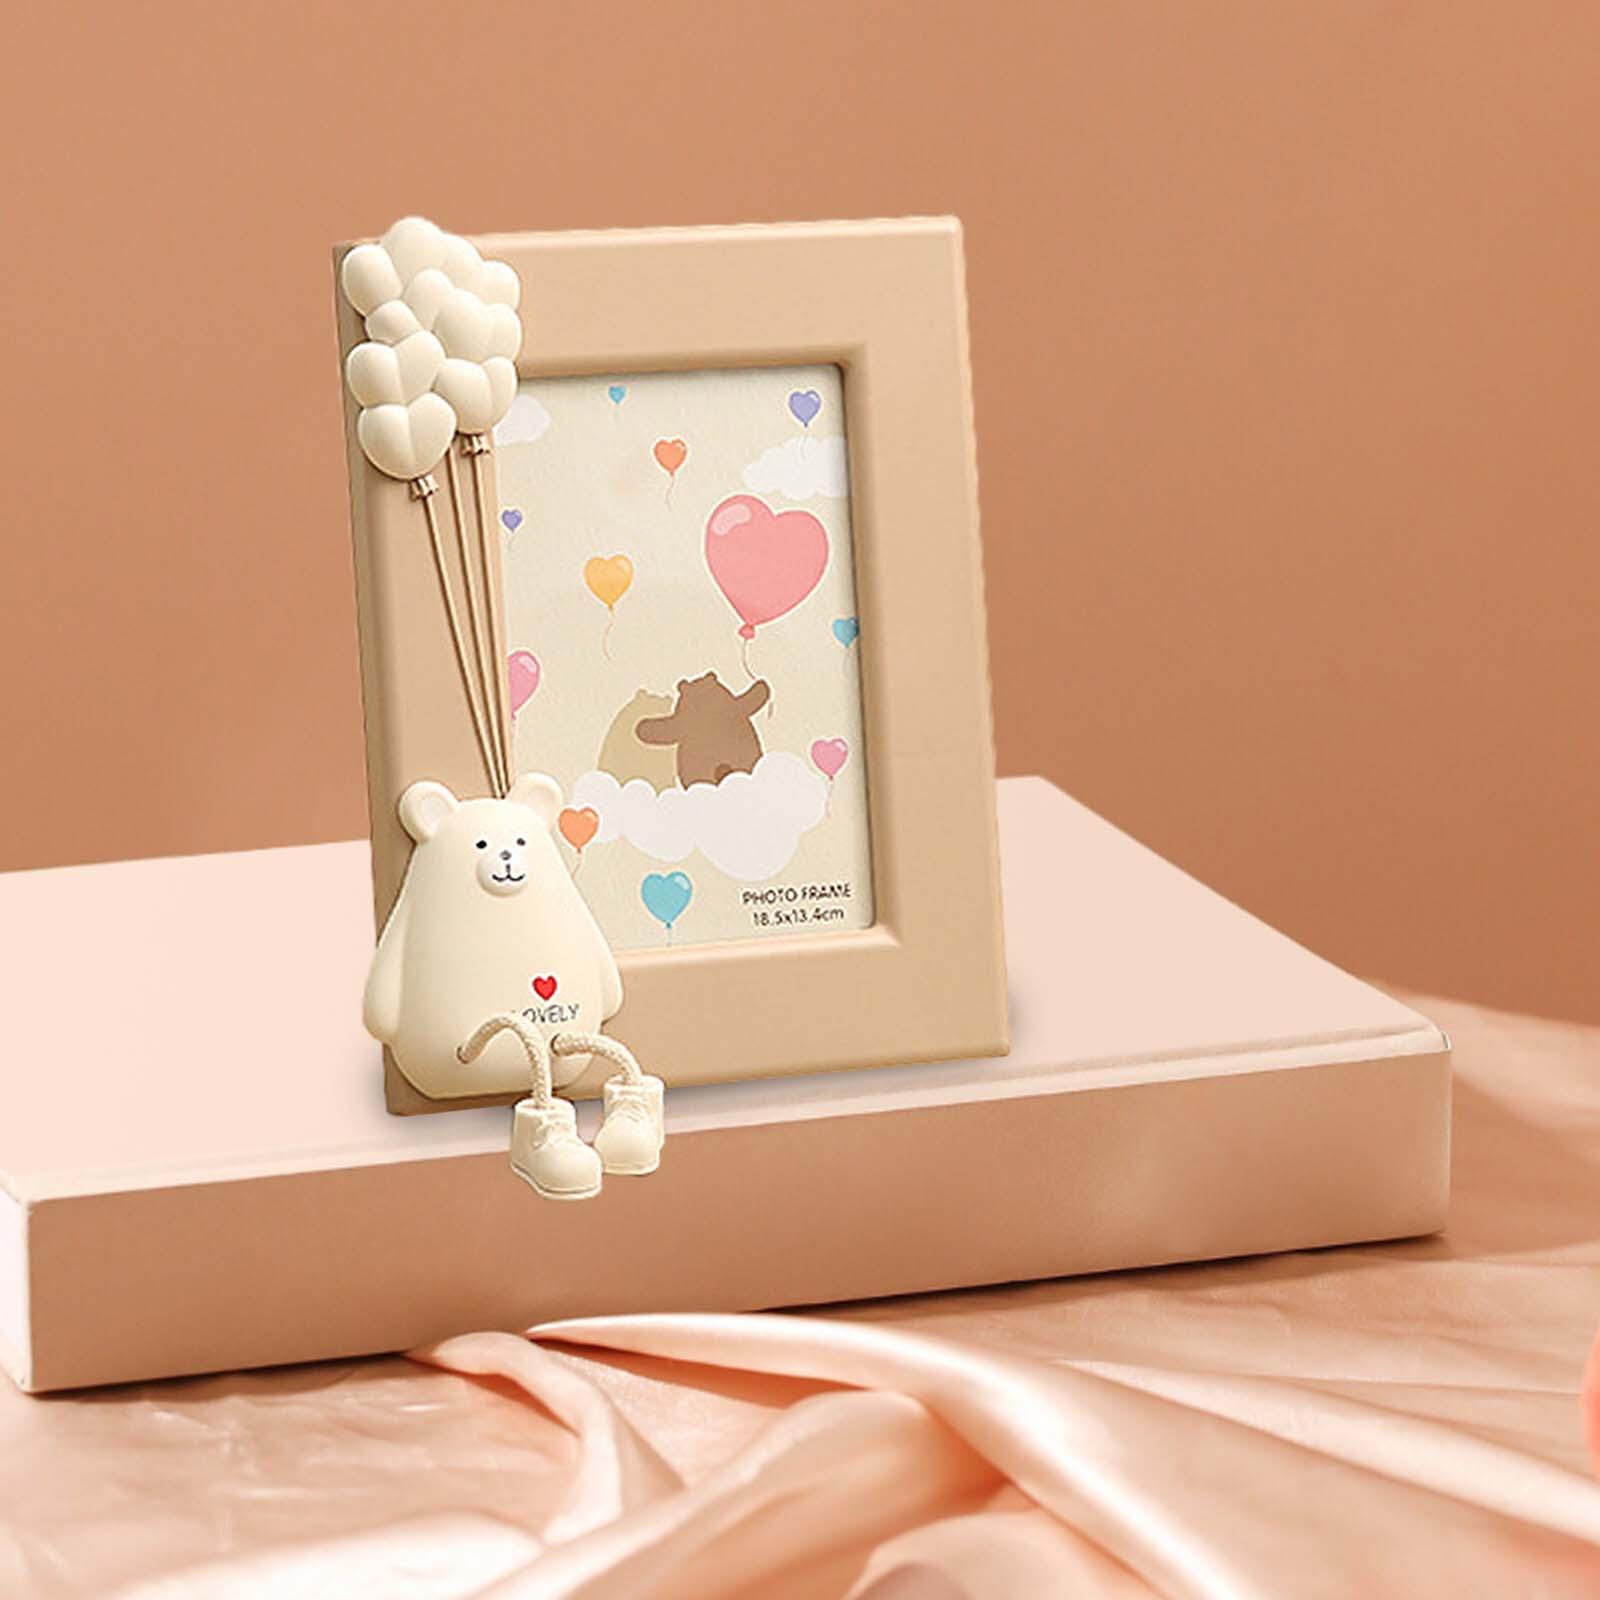 Cartoon Mouse Balloon Photo Frame Pictures Holder for Restaurant Dorm Studio Coffee Vertical